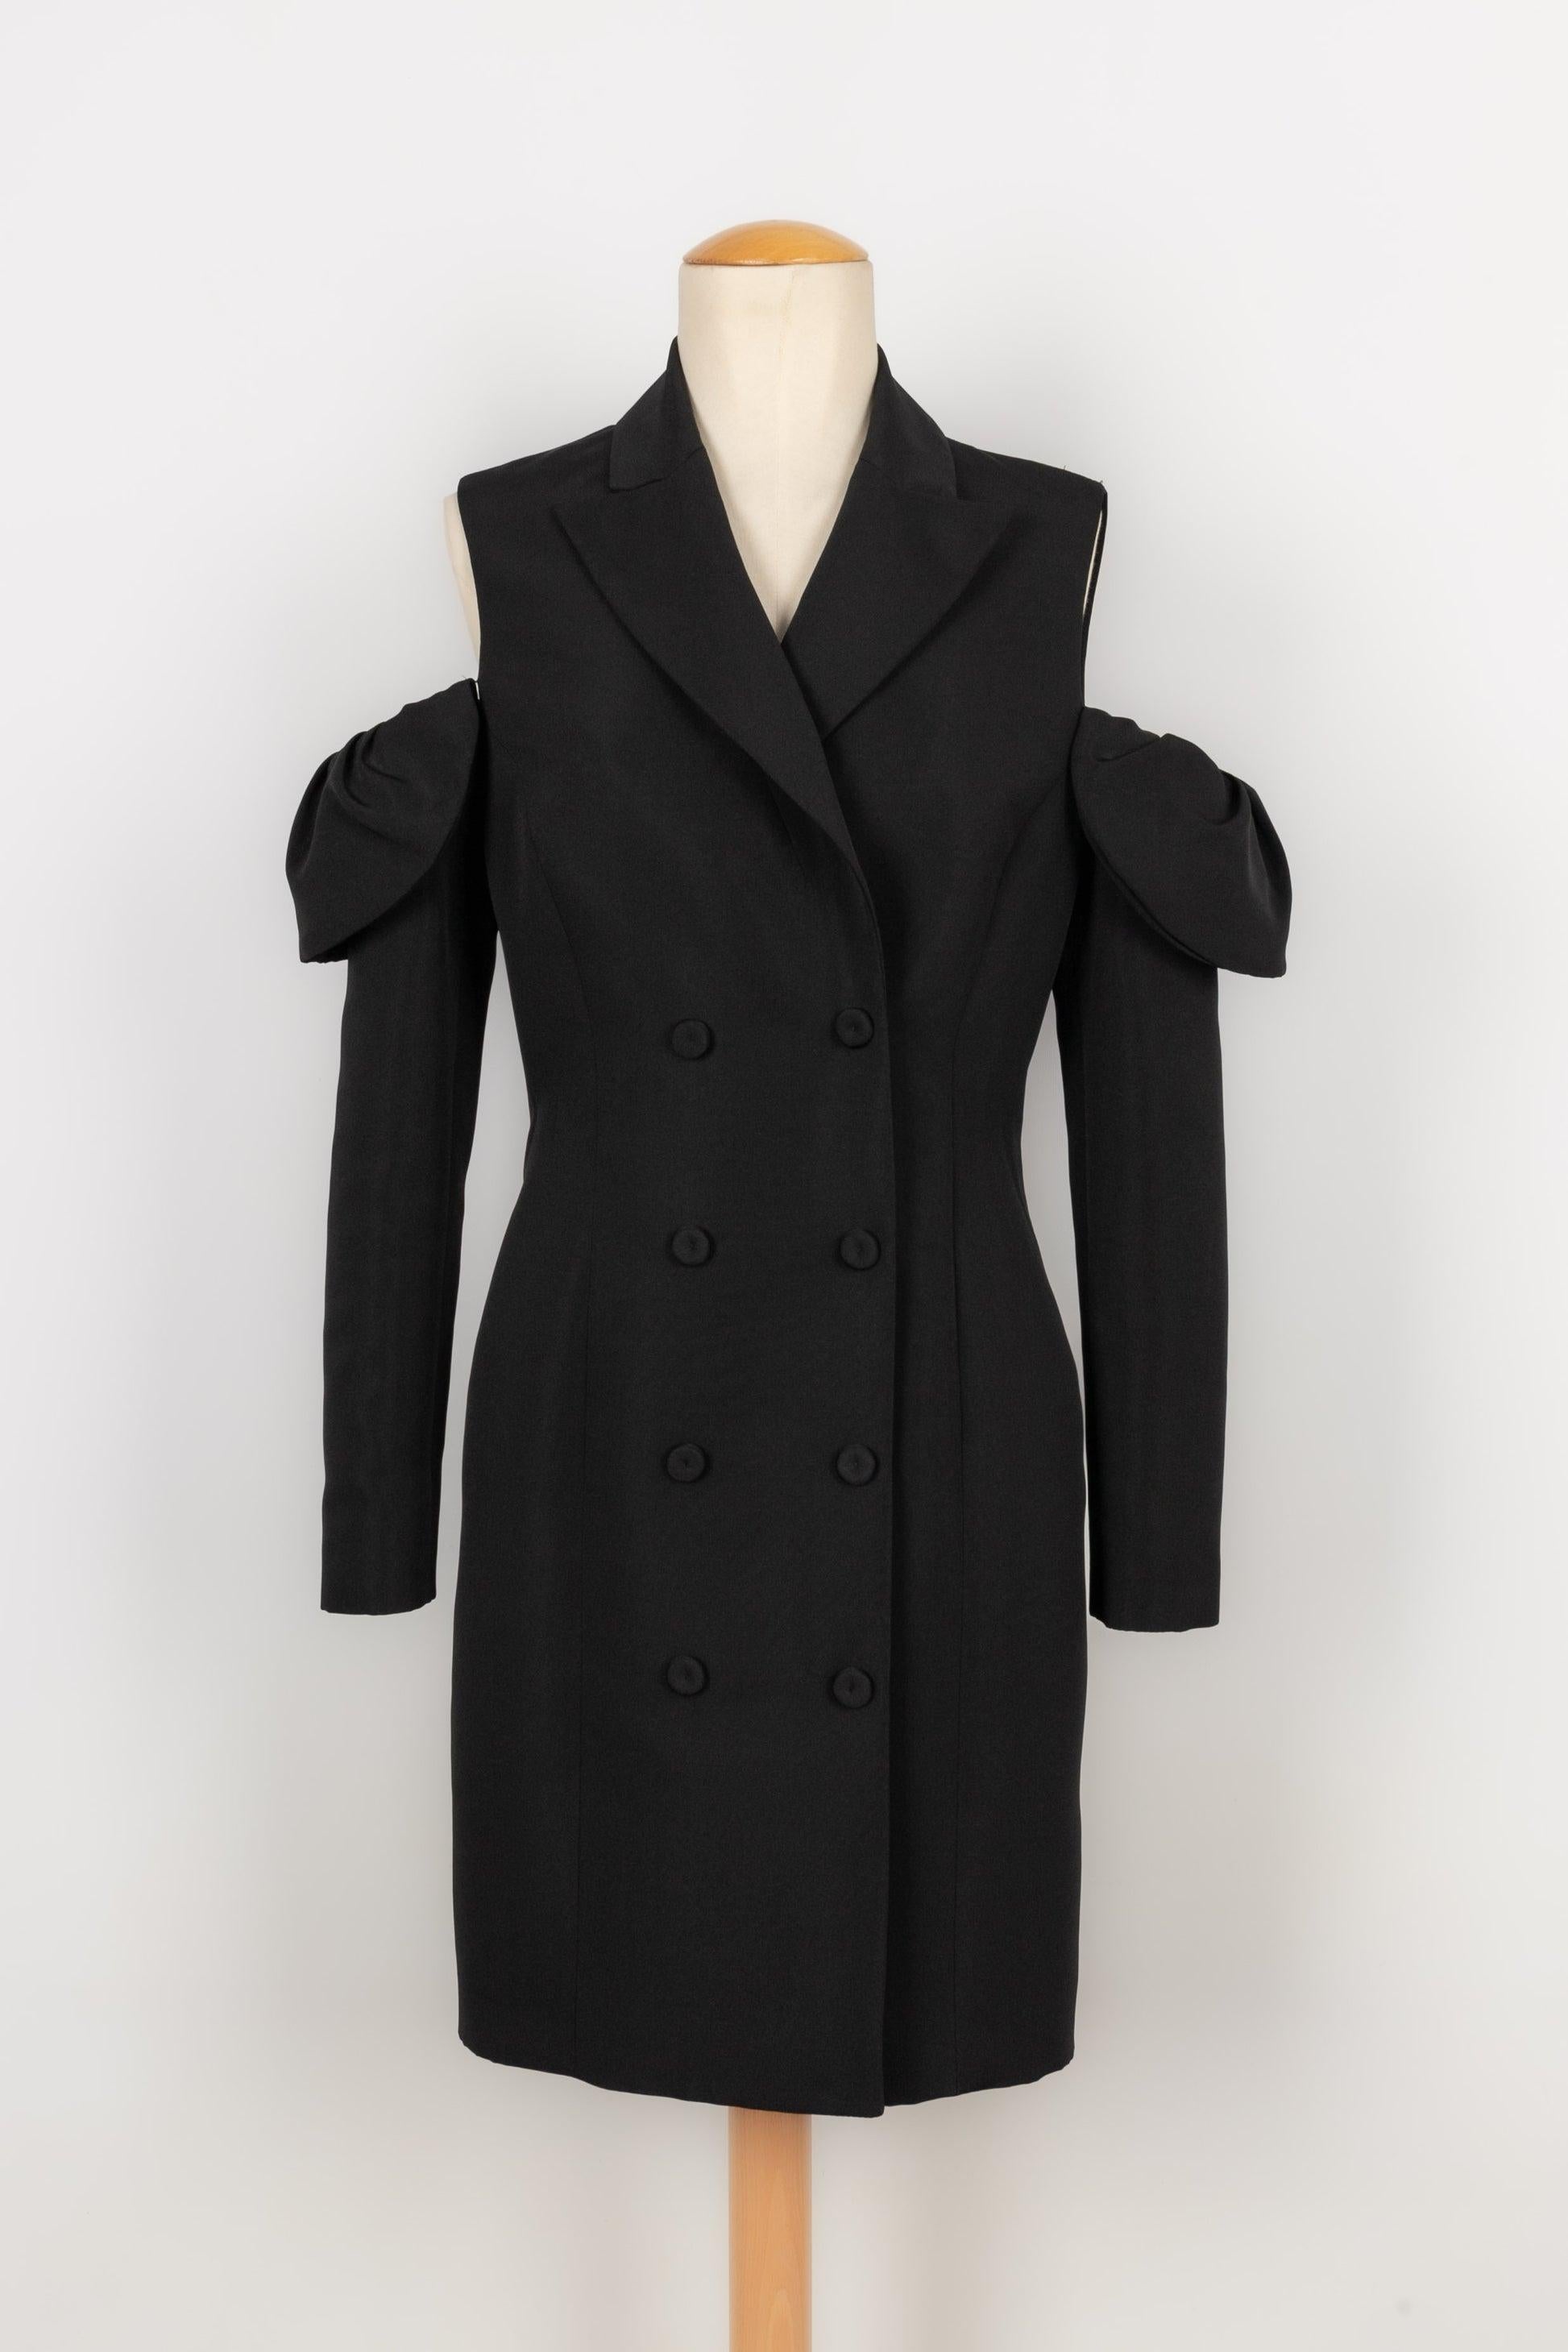 Moschino Bare Shoulders Mid-Length Coat-Style Dress, 2021 For Sale